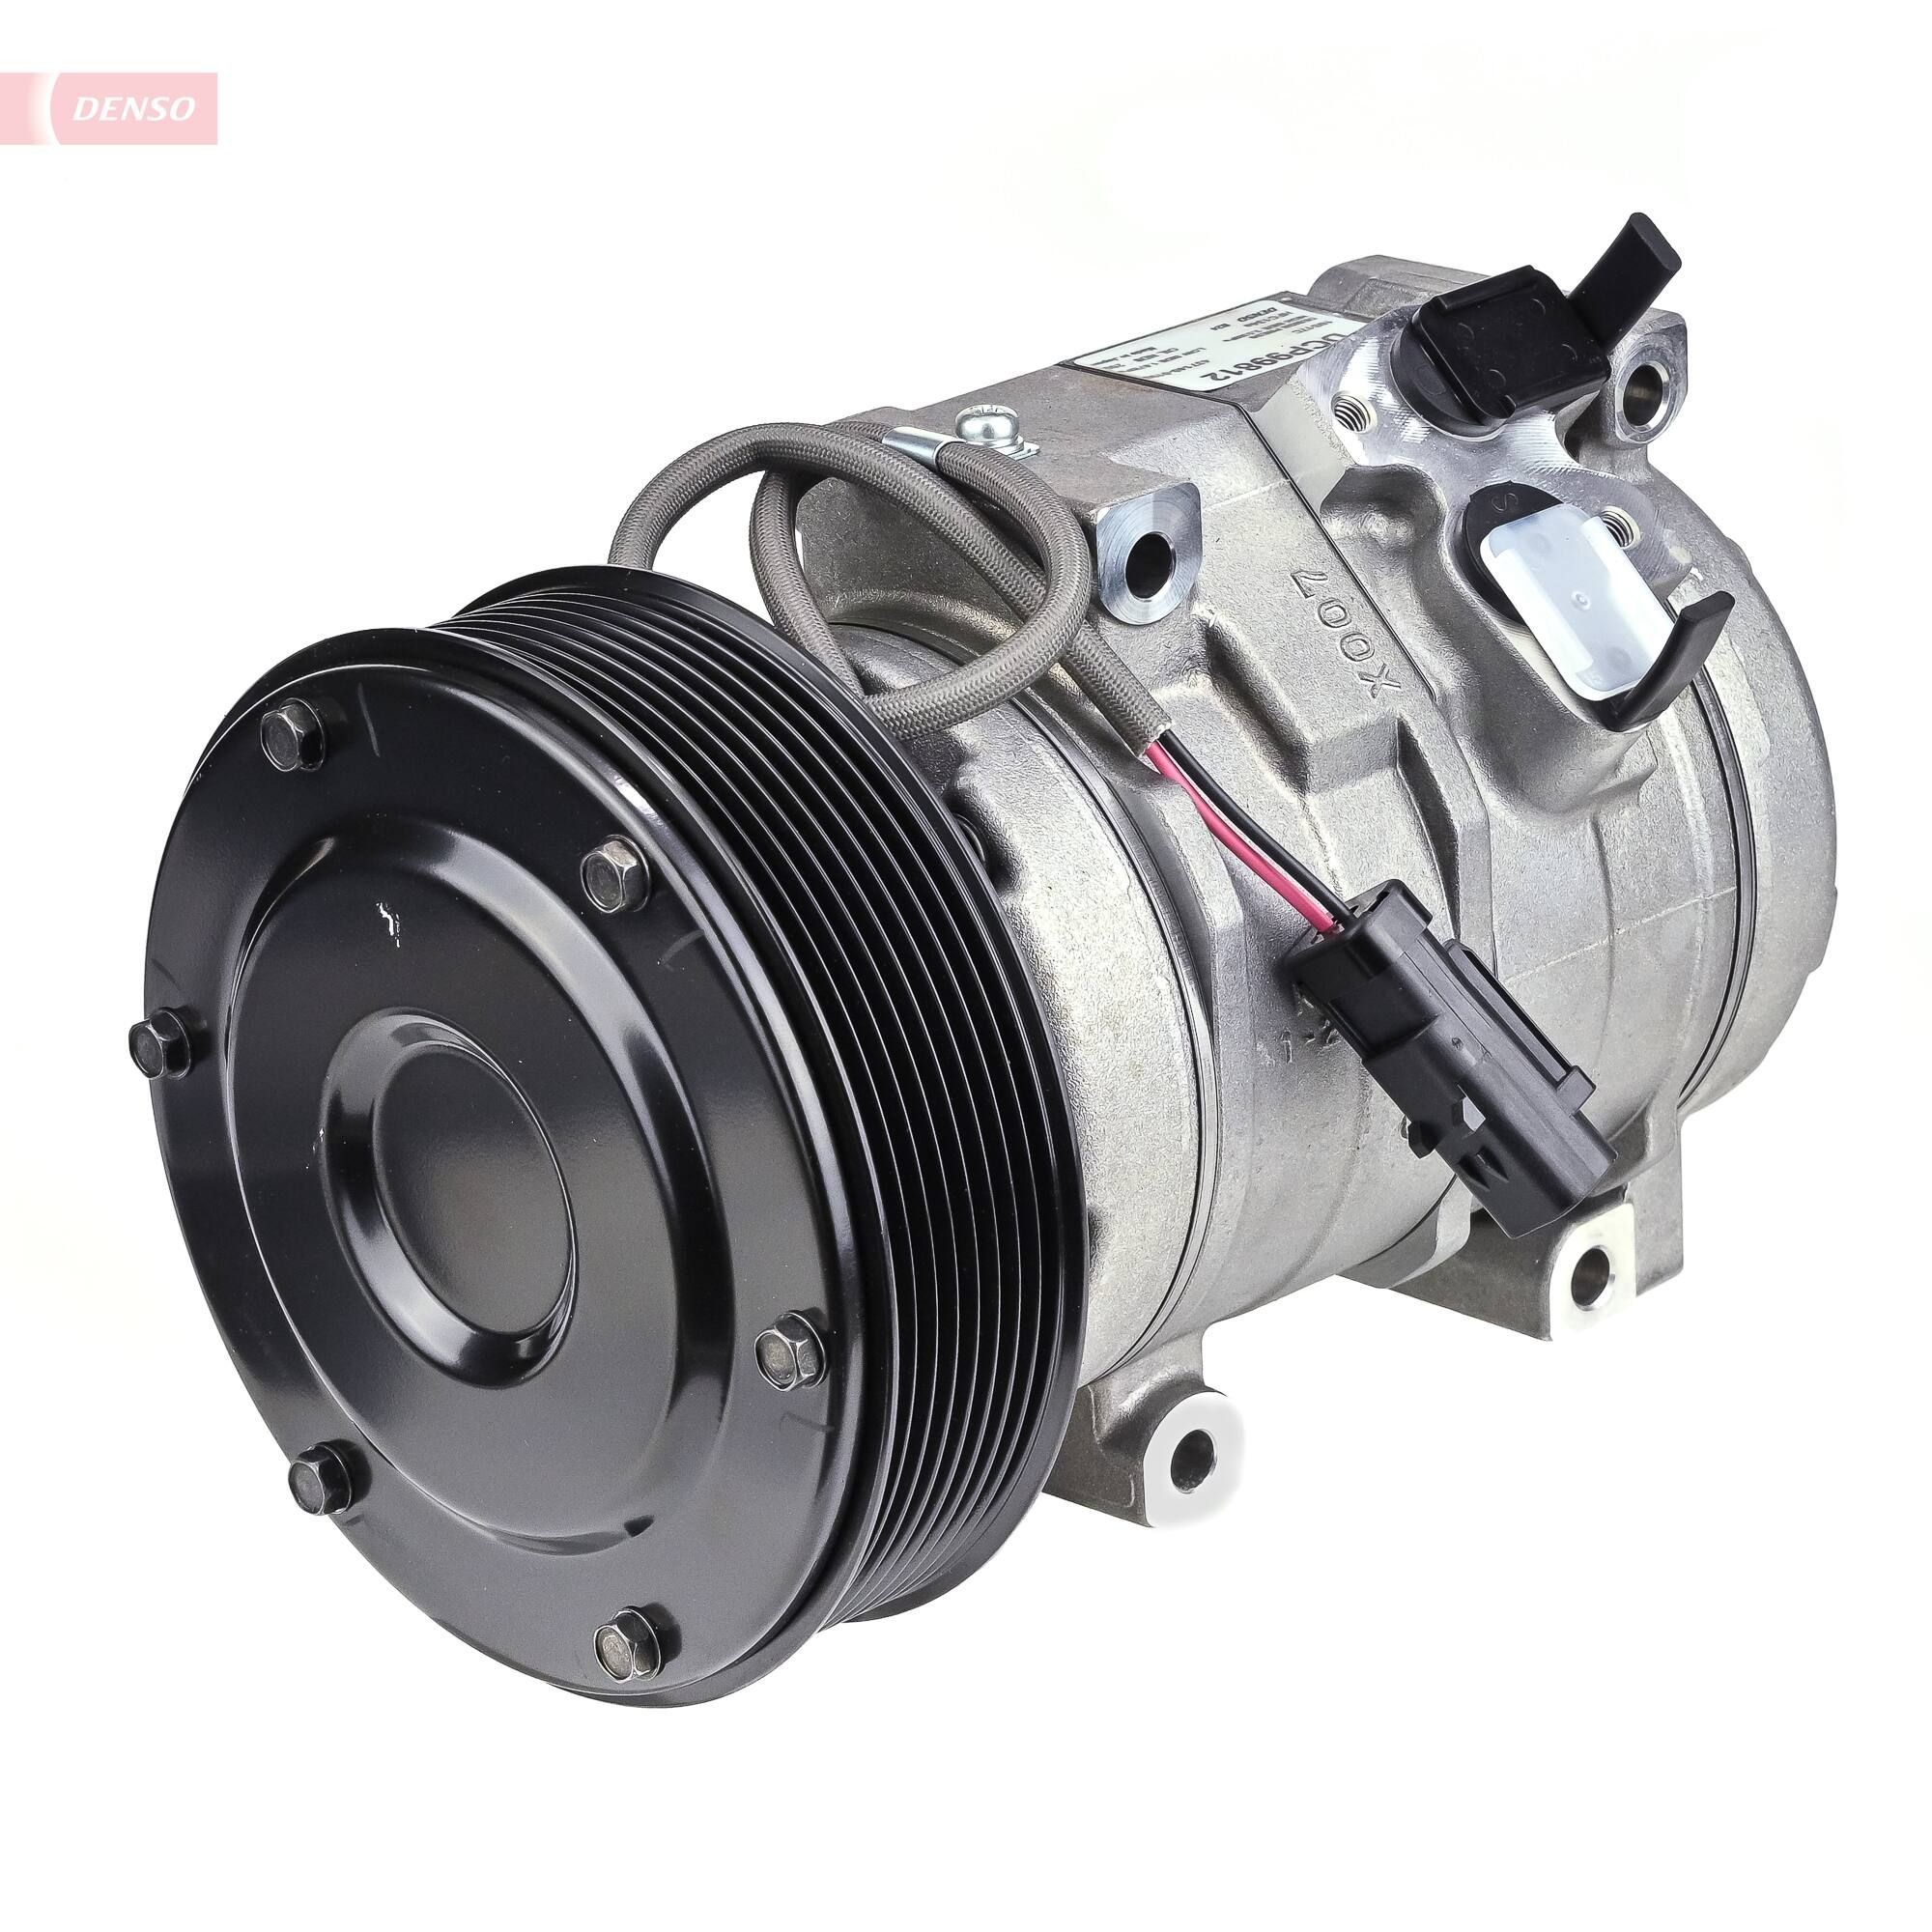 DENSO DCP99812 Air conditioning compressor 10S17C, 24V, PAG 46, R 134a, with magnetic clutch